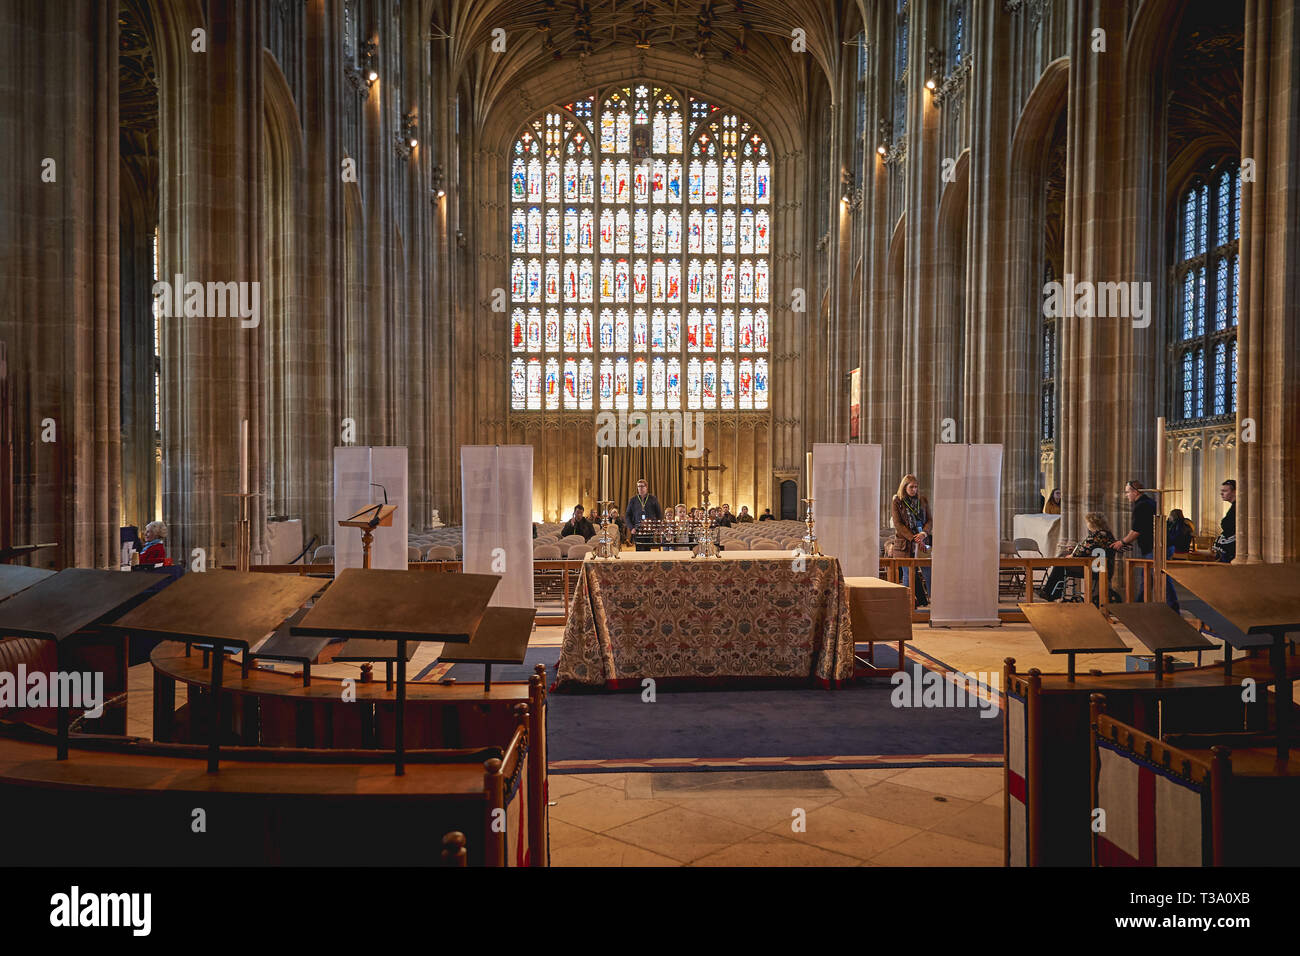 Interior of the medieval gothic St. George's Chapel inside the Windsor Castle (UK). Stock Photo